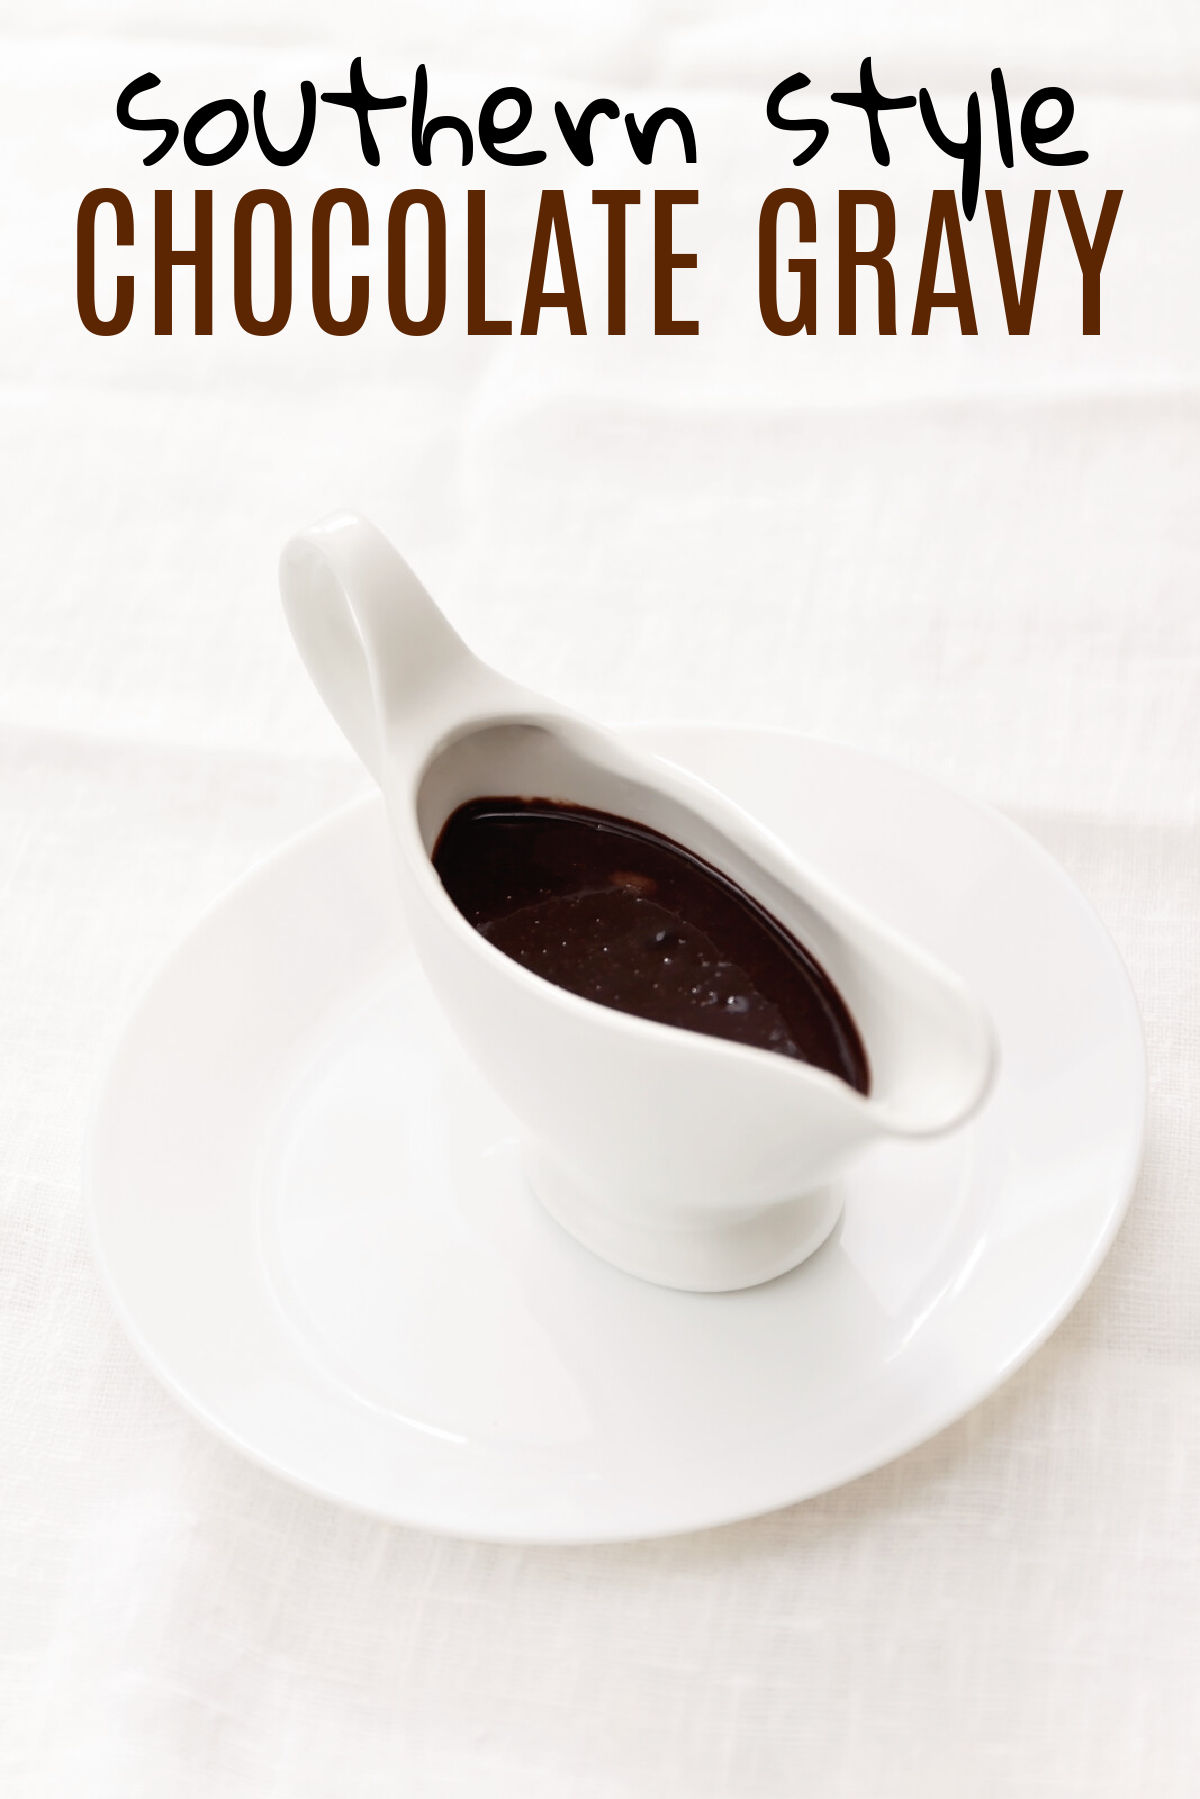 A white gravy boat filled with chocolate gravy sitting on a white plate with a white background